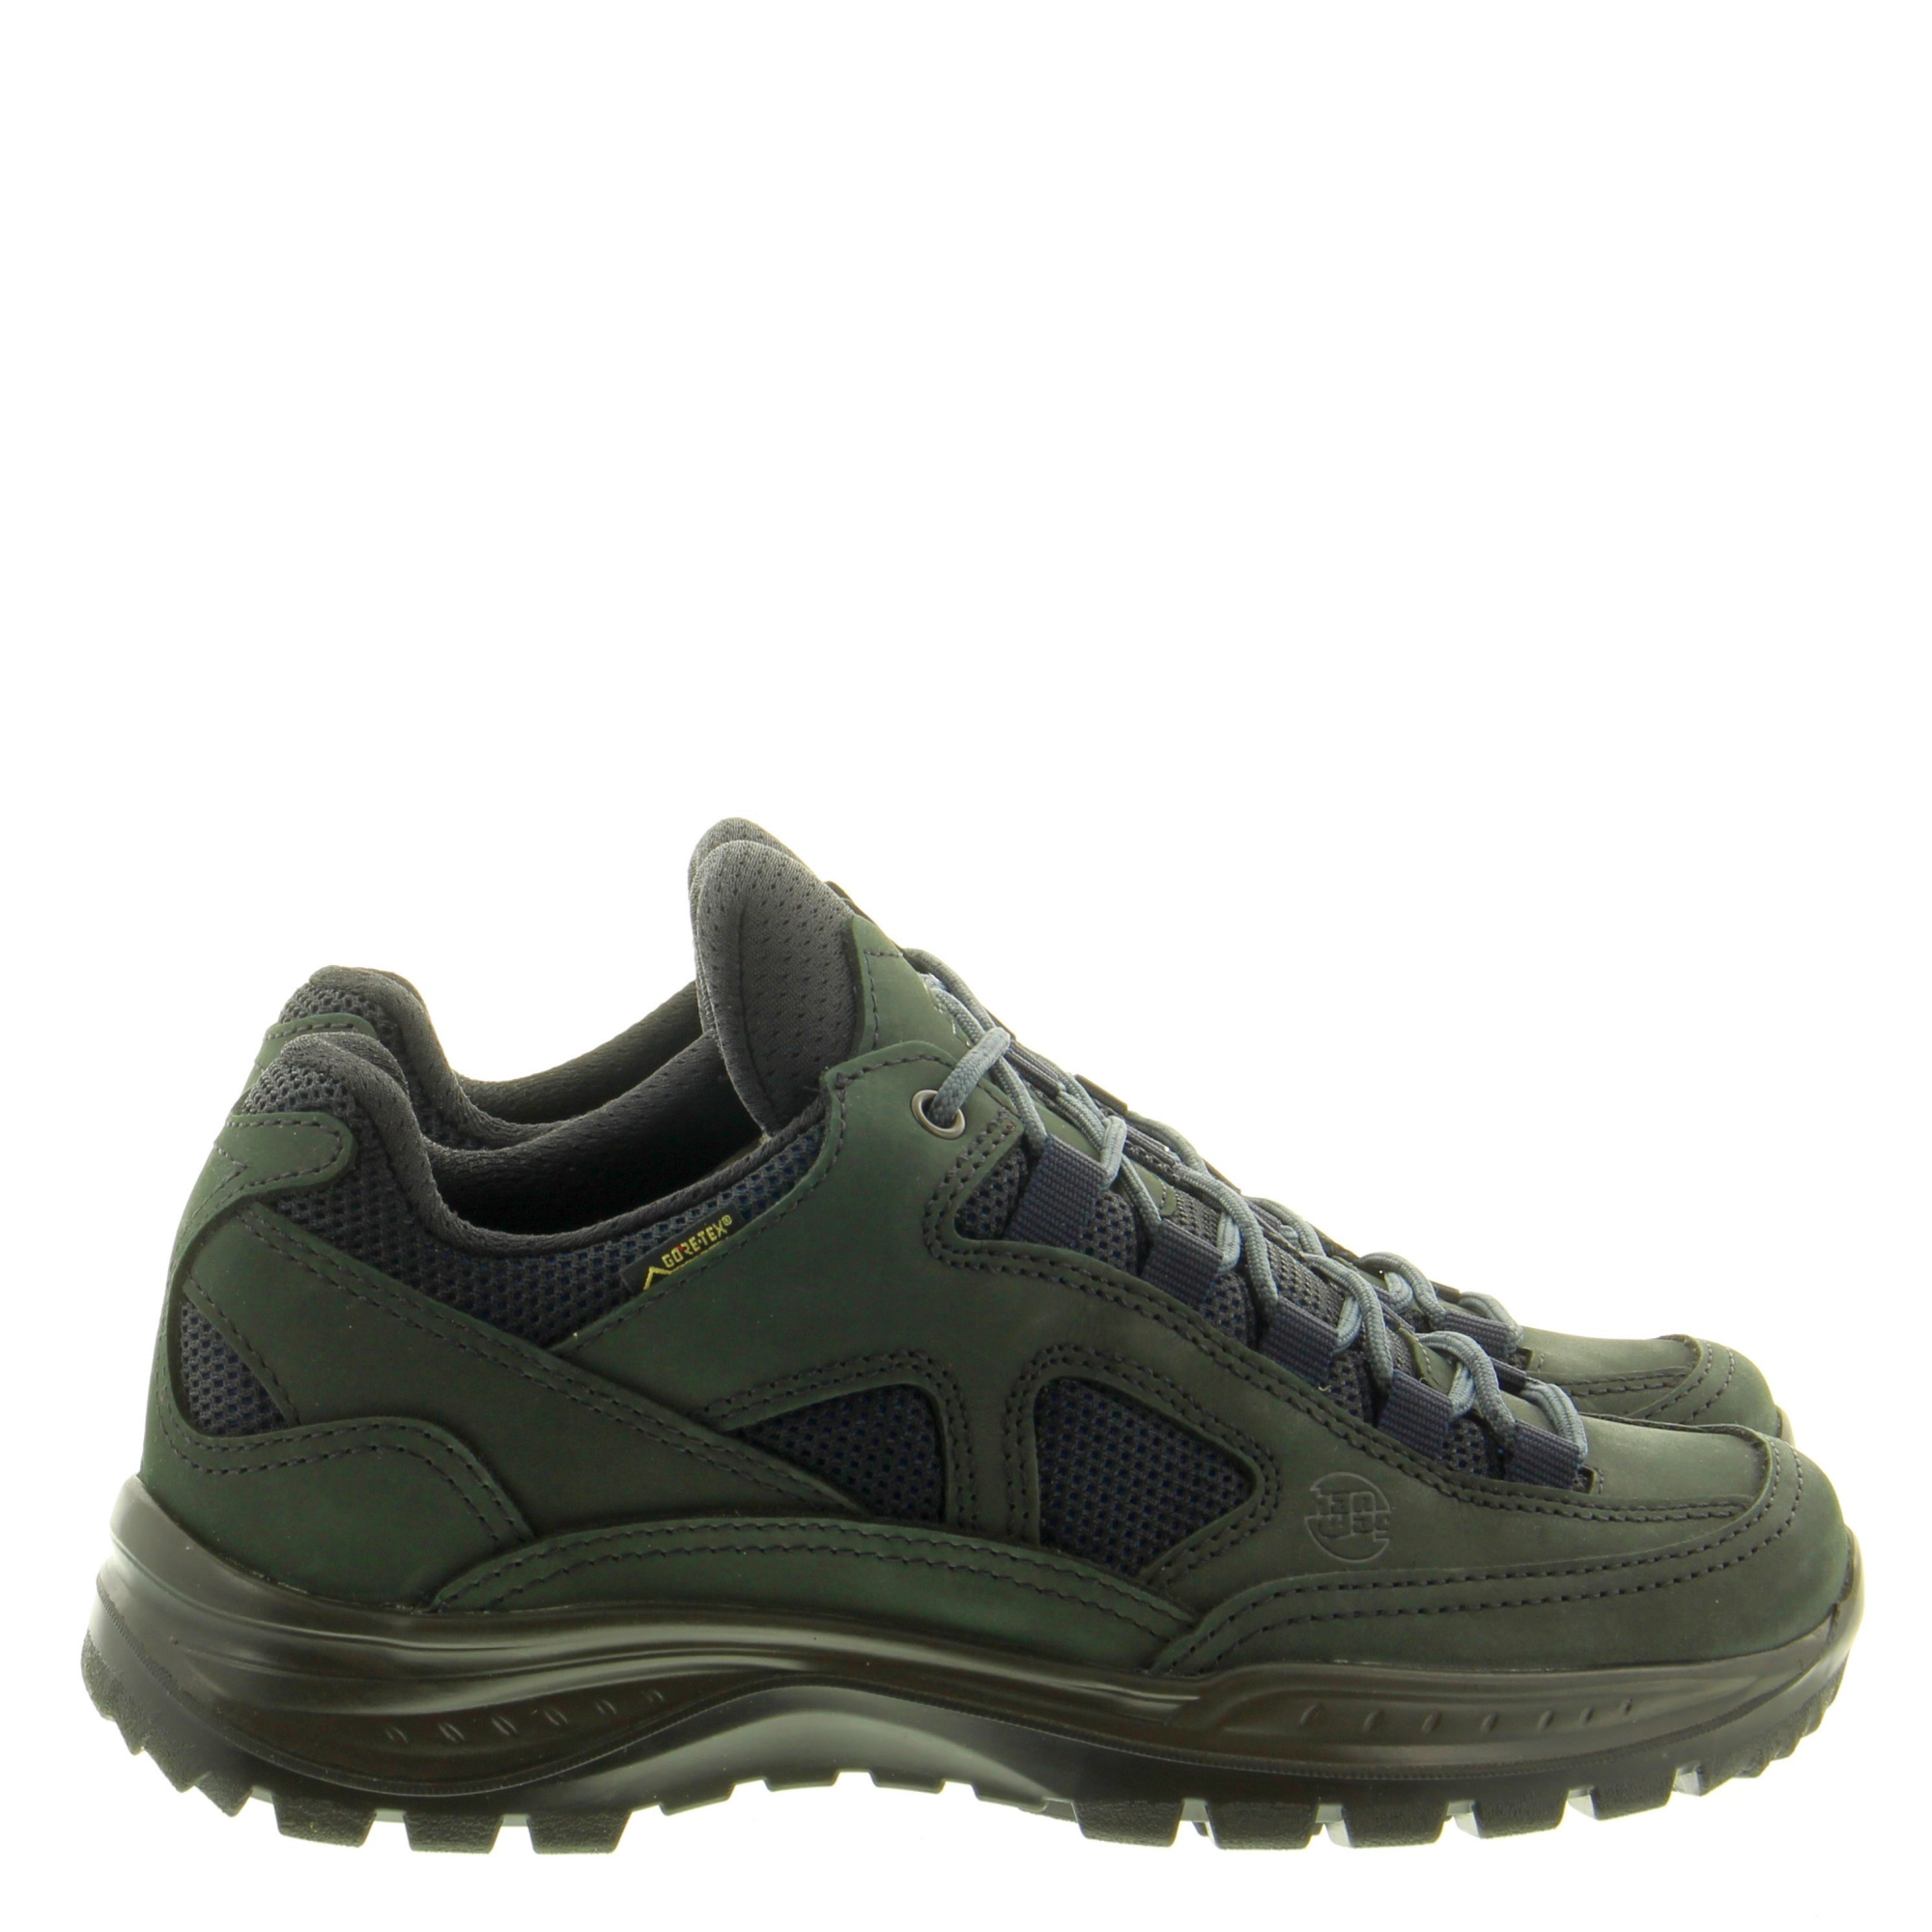 Hanwag 5512 Gritstone Lady GTX 11 Antracite